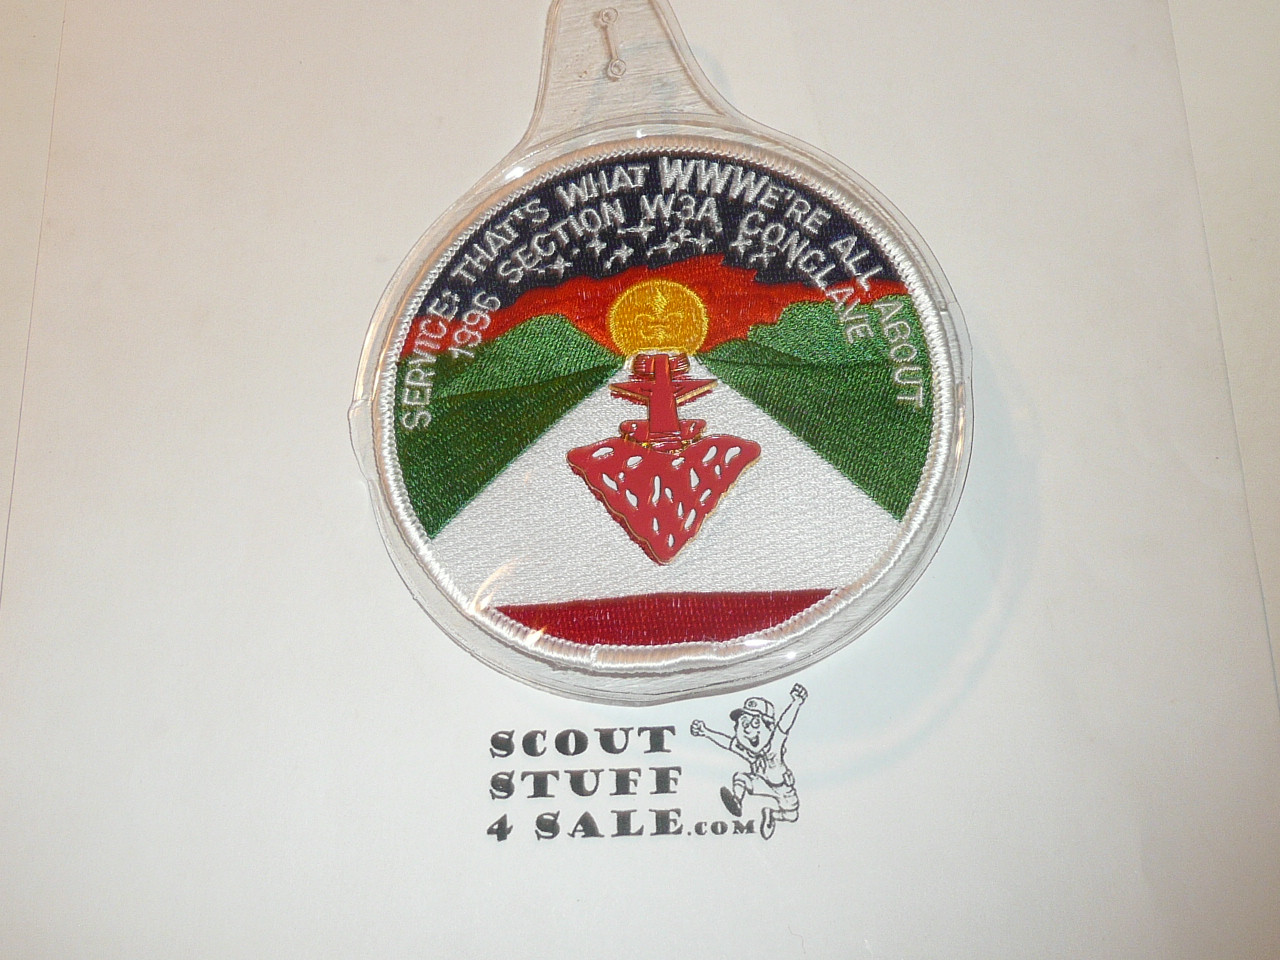 Section W3A 1996 O.A. Conclave Patch with Participation Pin - Scout